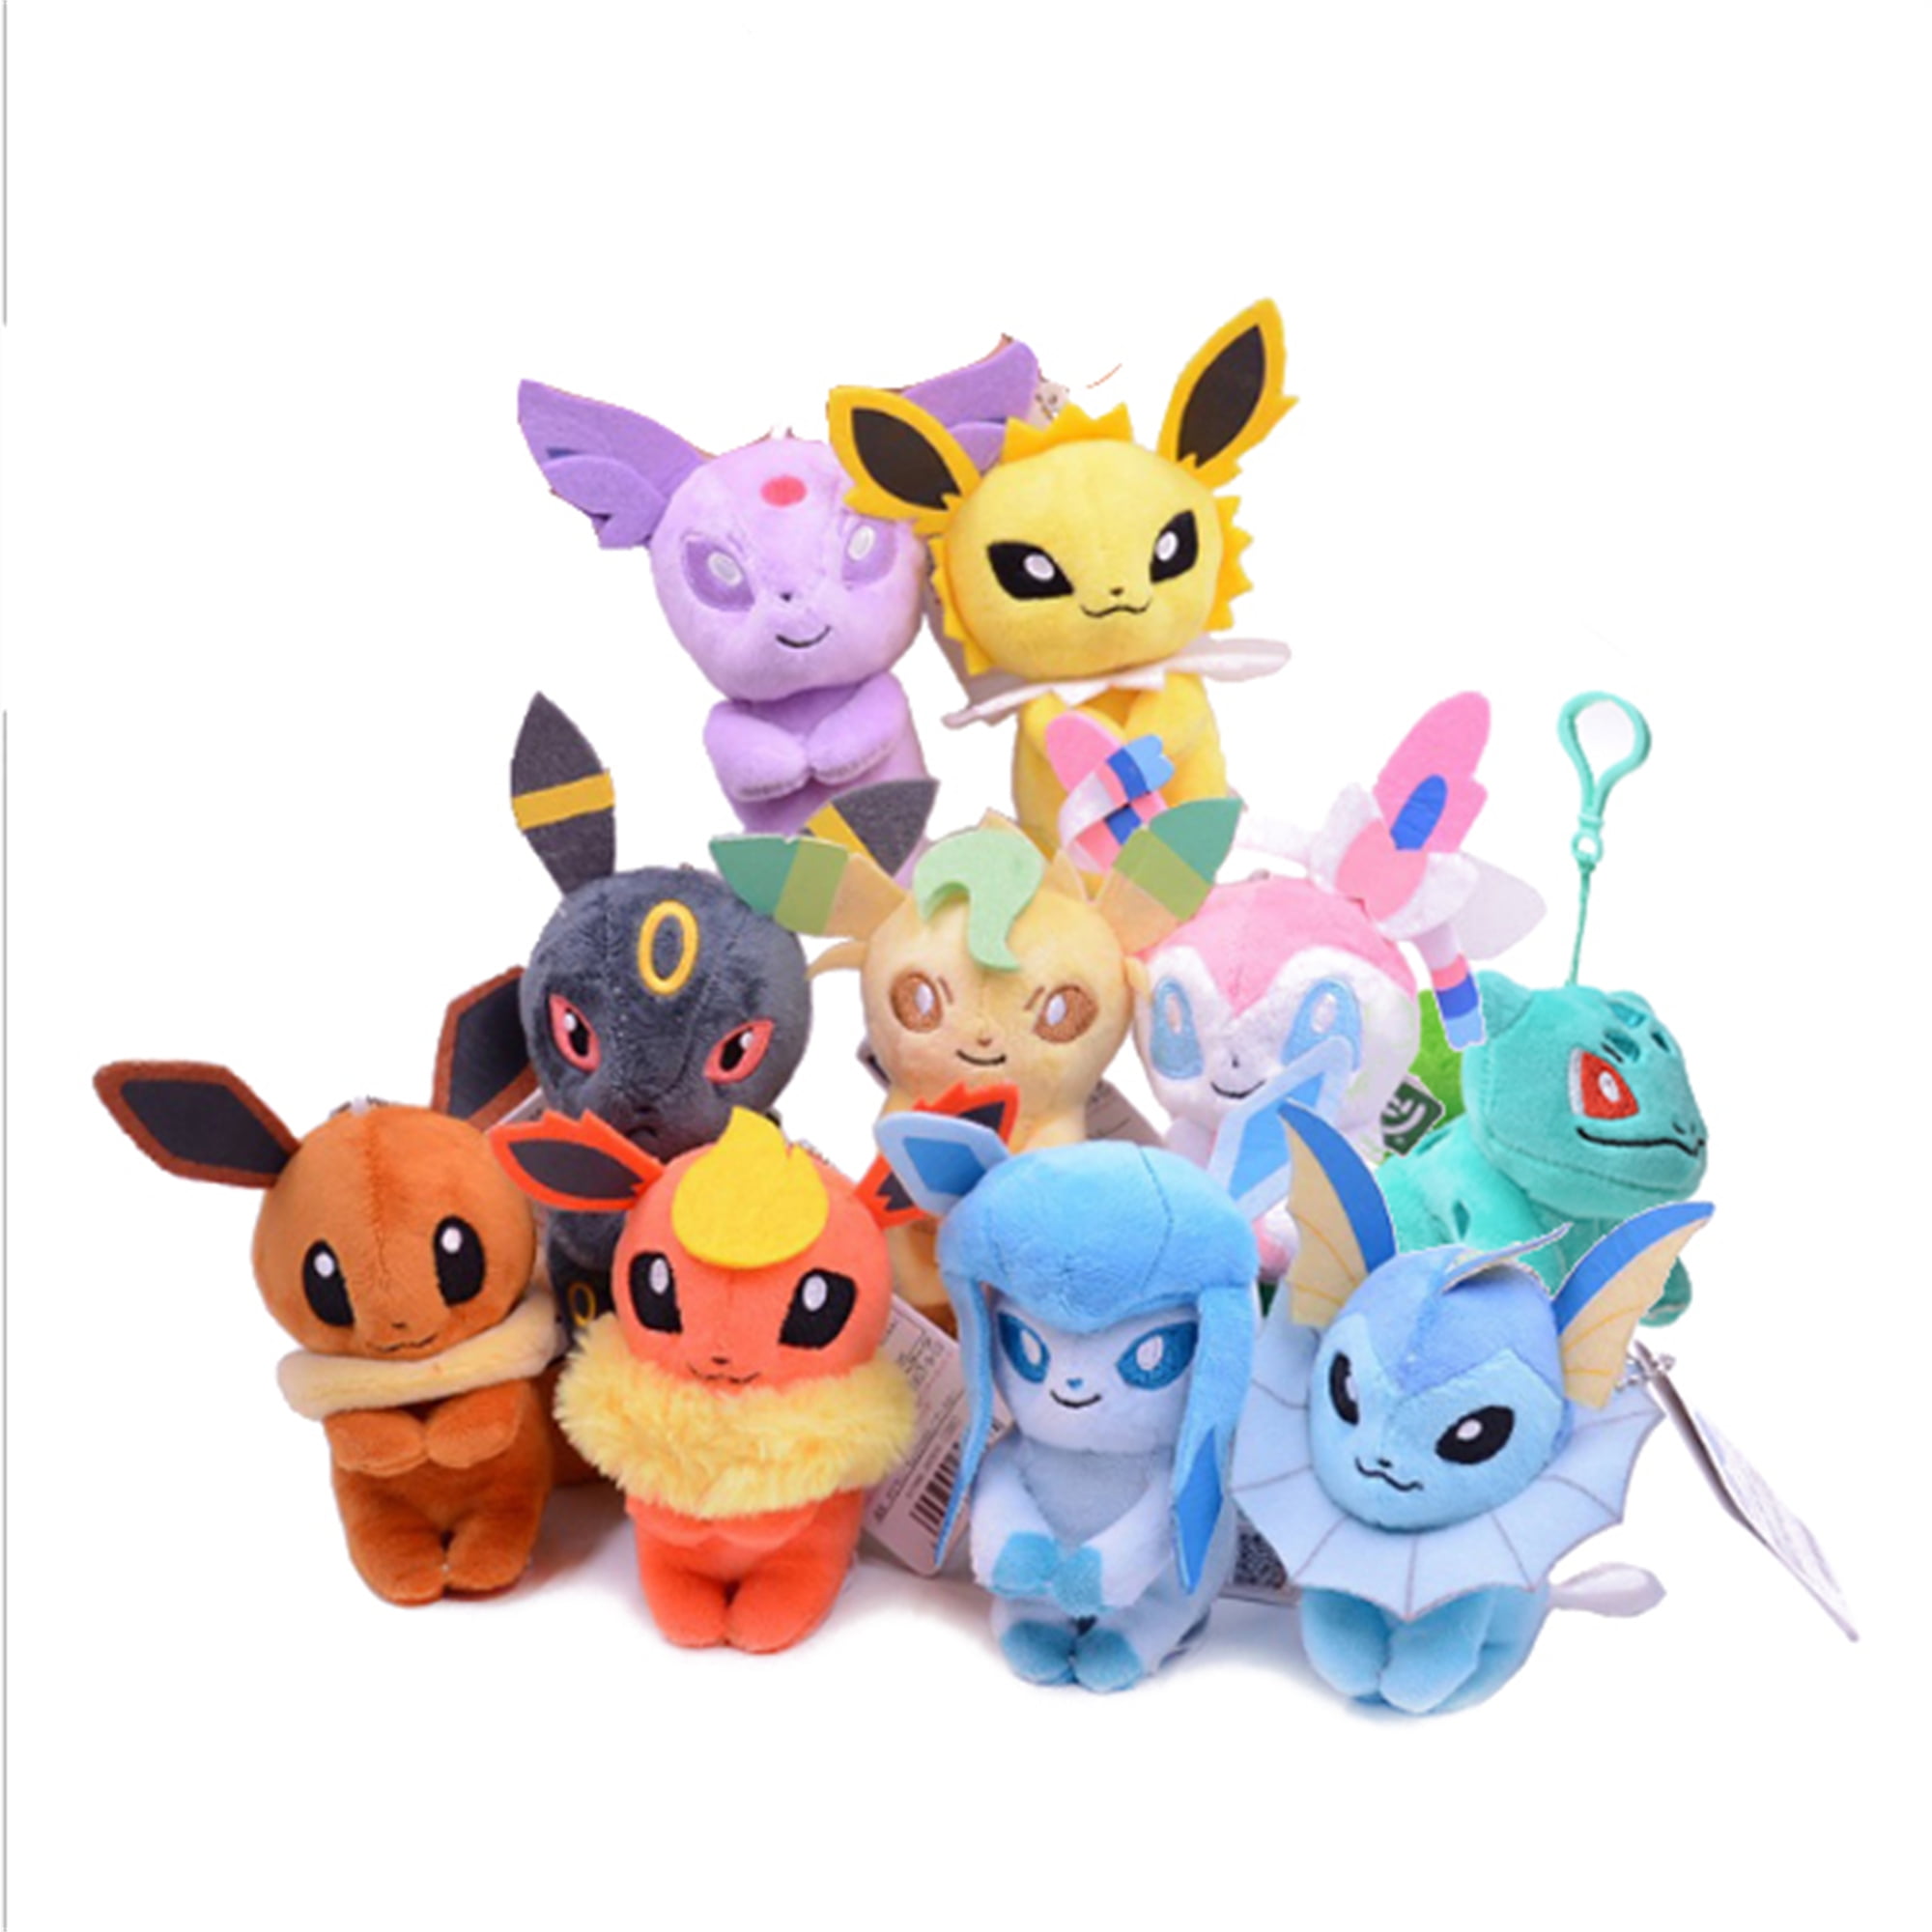 Christmas Gift Movable Pokemon Eevee Toy Action Figure 4 inches Collectible